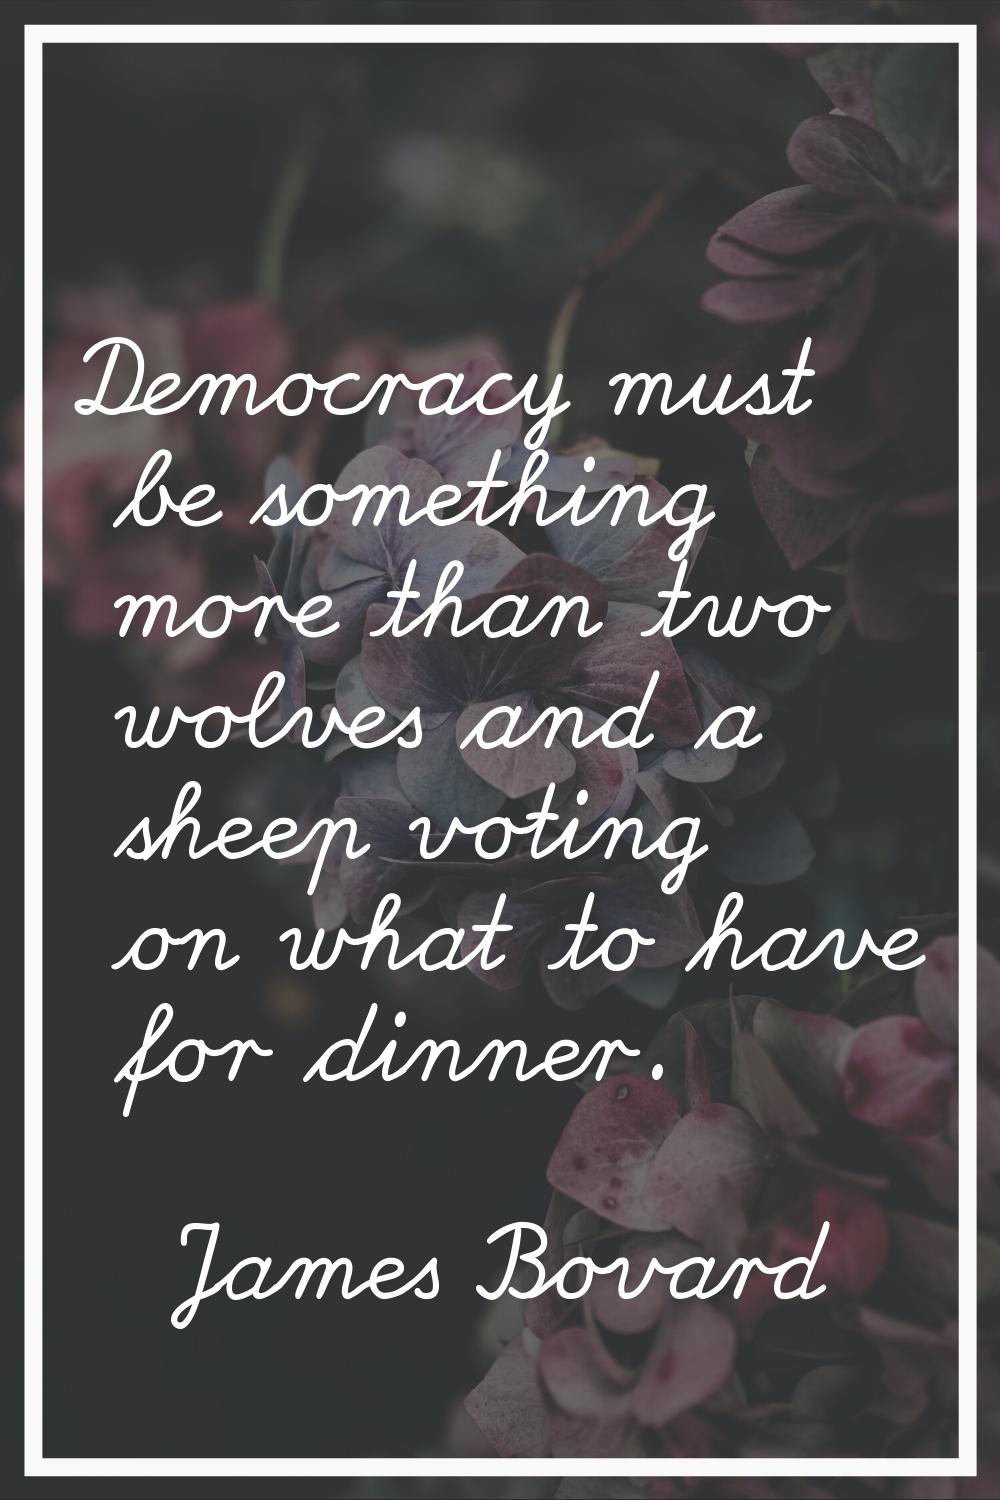 Democracy must be something more than two wolves and a sheep voting on what to have for dinner.